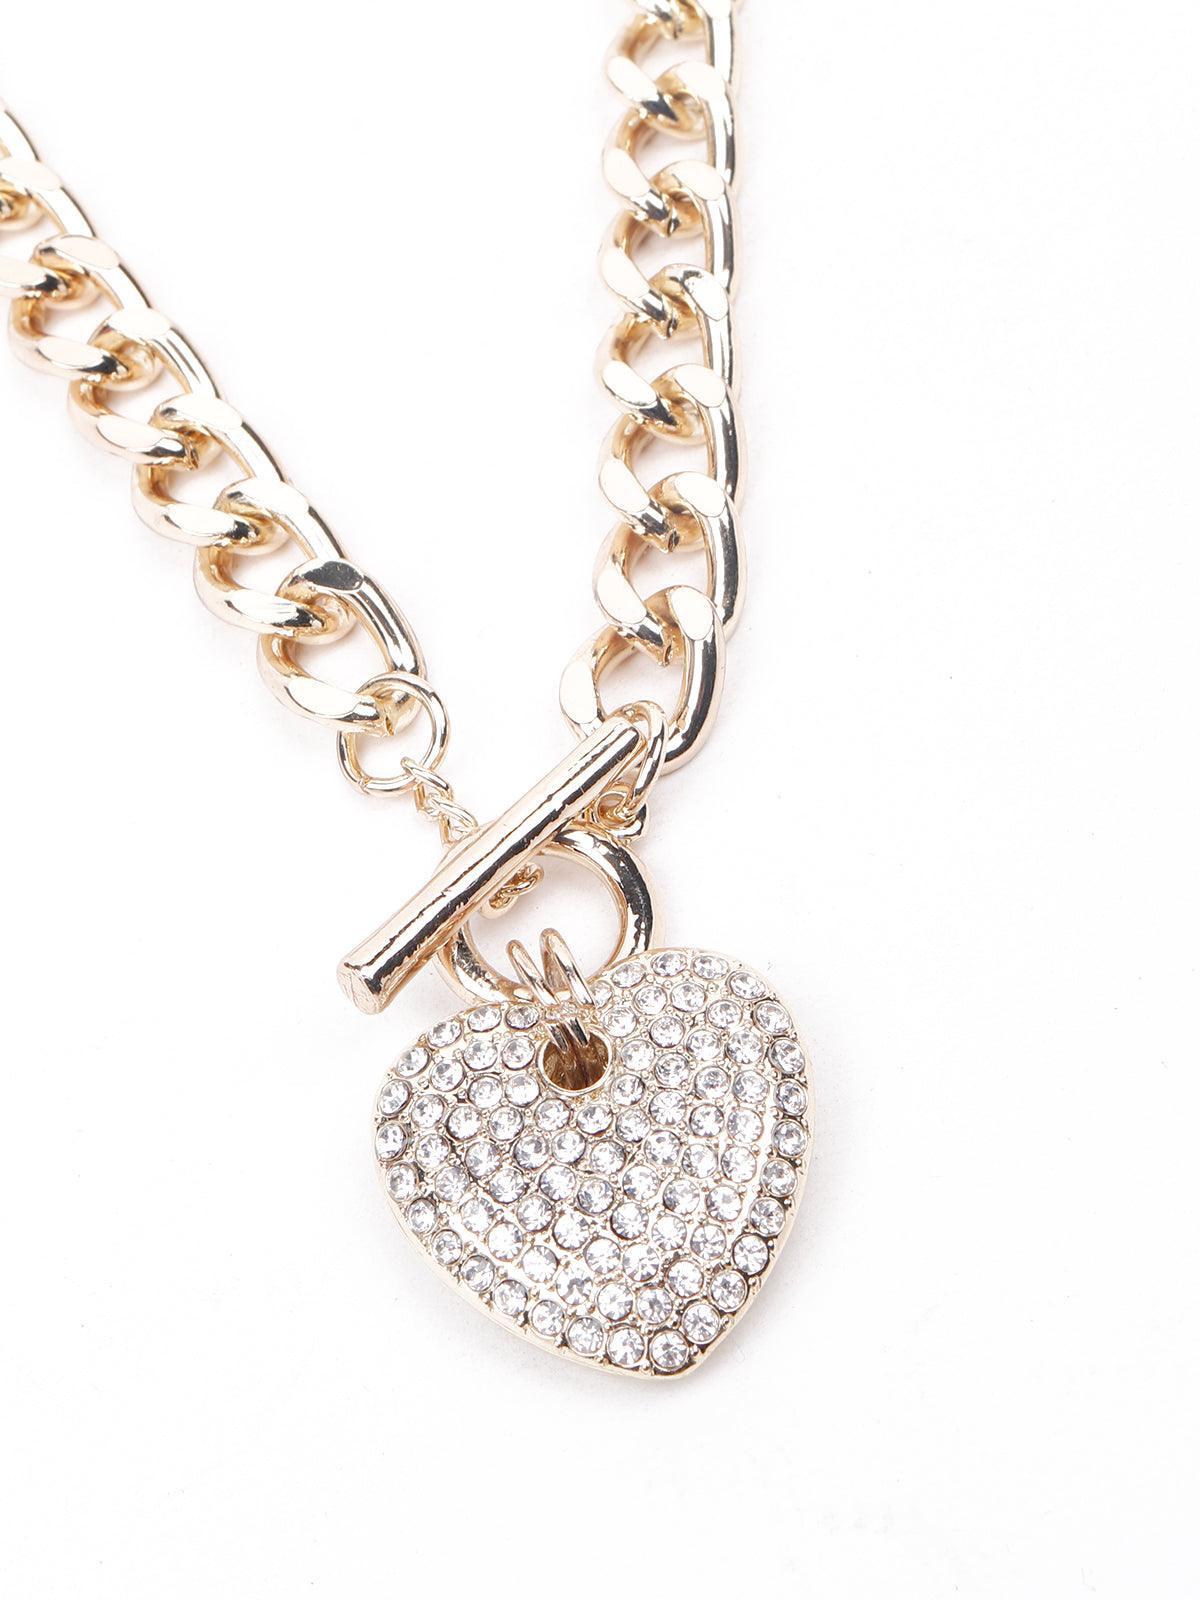 Thick gold-tone chain with a heart-shaped locket - Odette